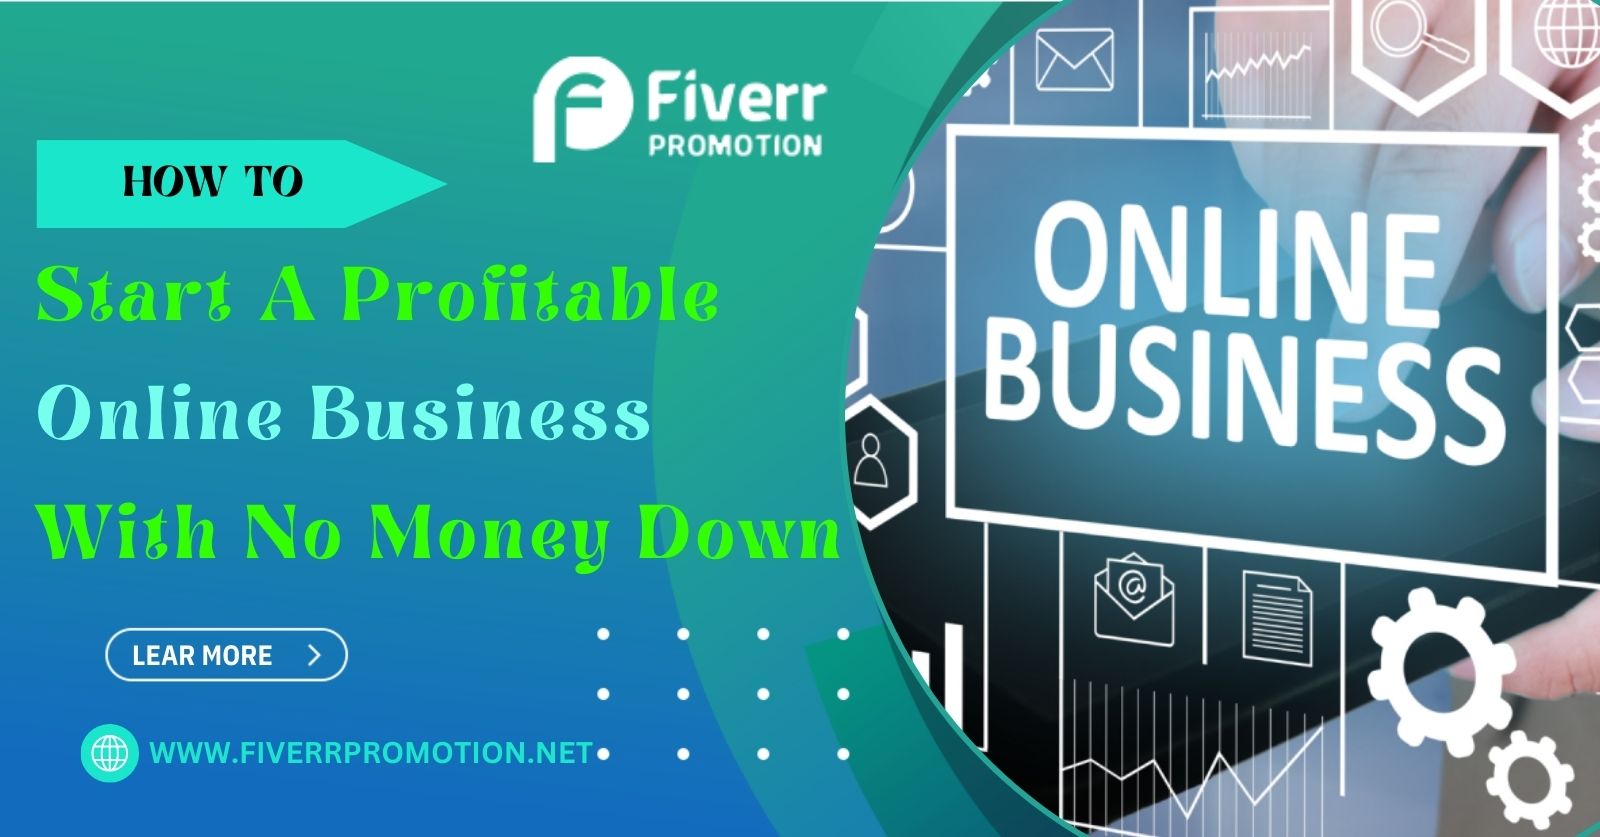 How to Start a Profitable Online Business with No Money Down